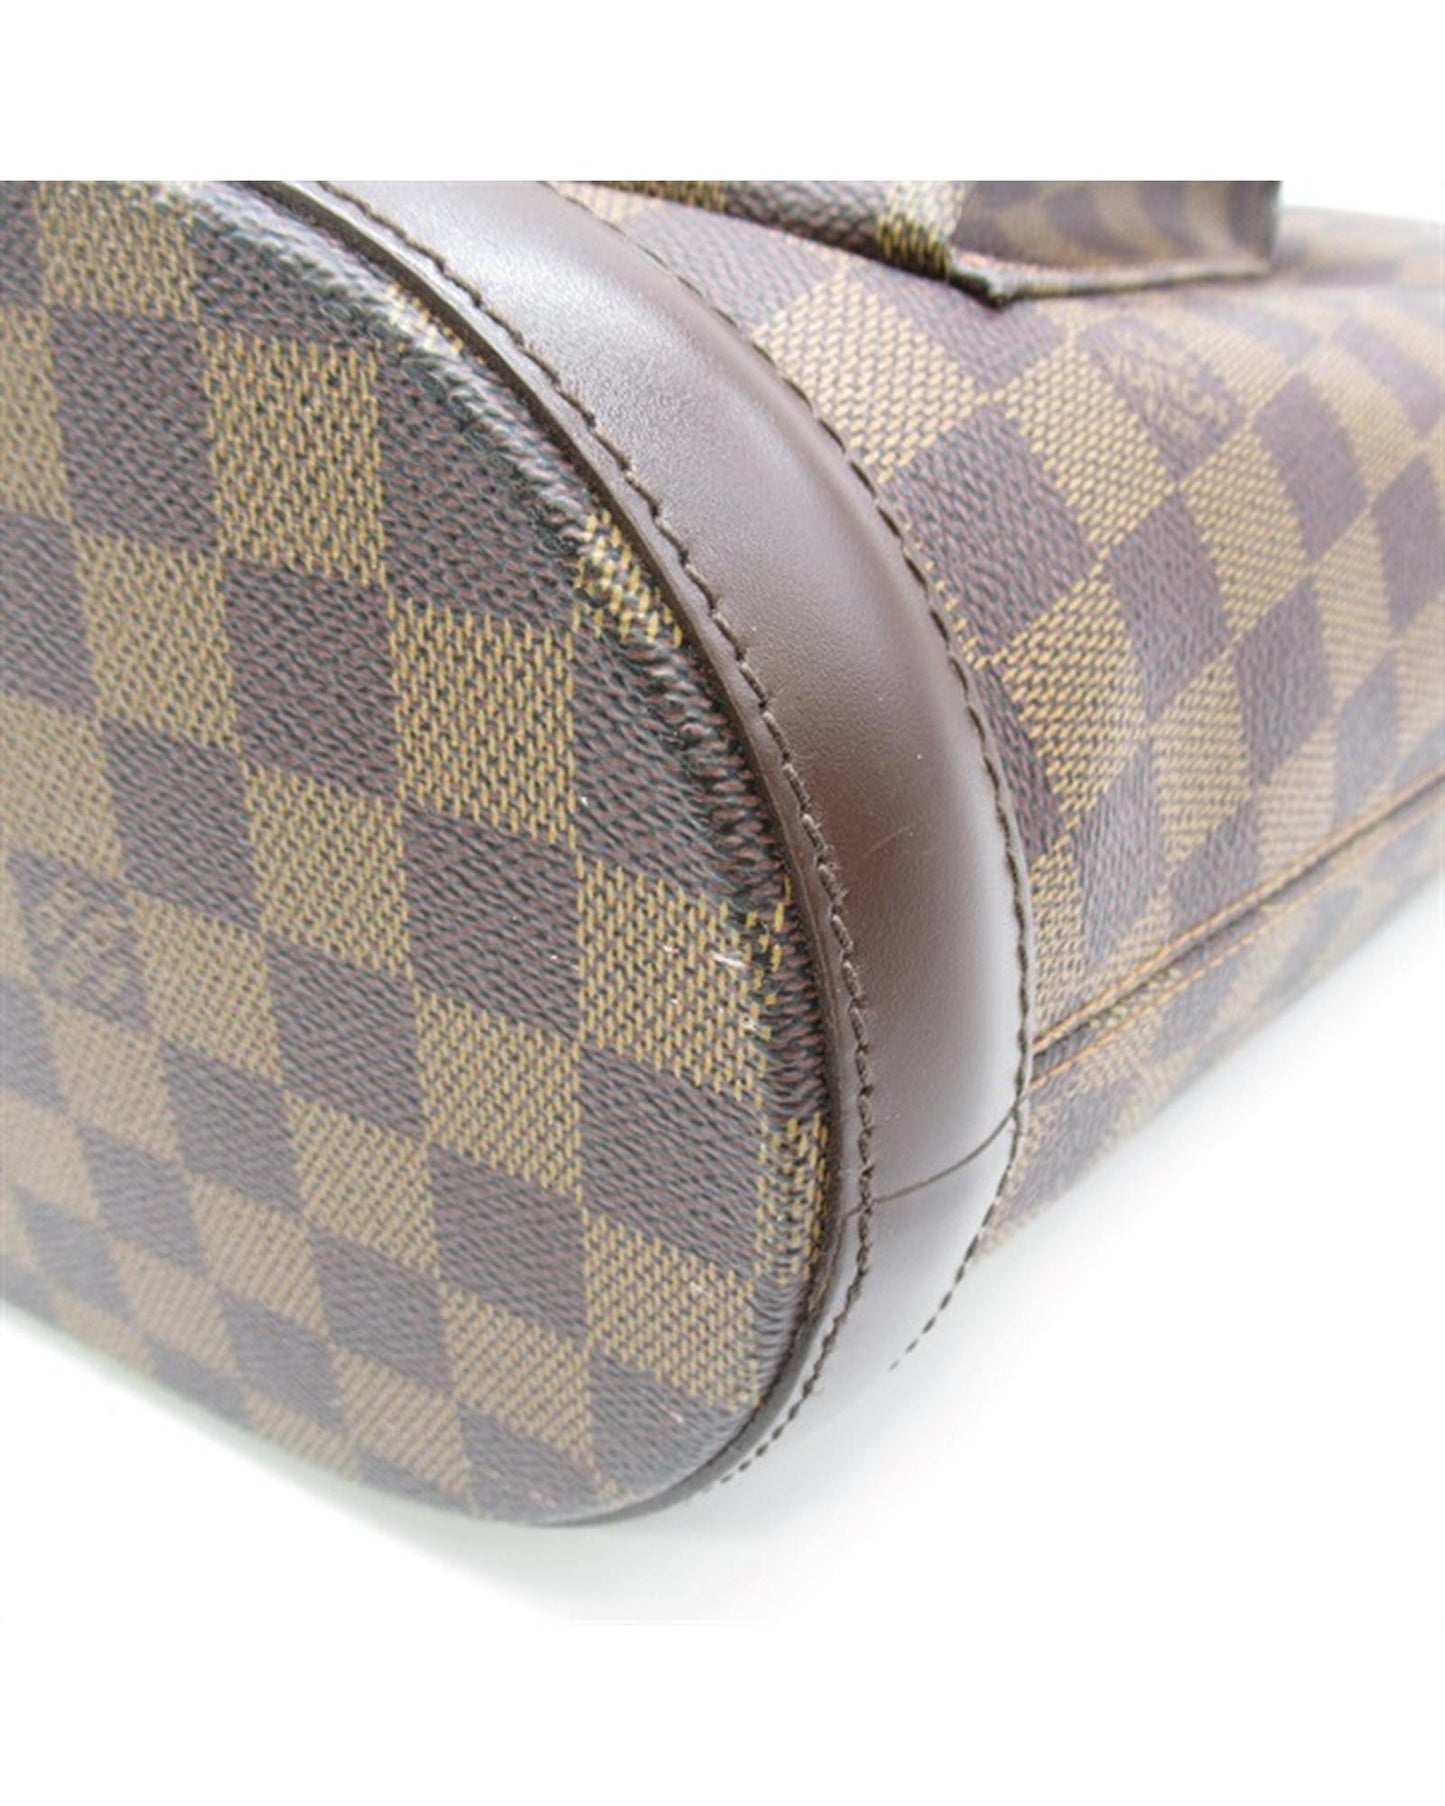 Louis Vuitton Women's Damier Ebene Manosque GM with Pouch Bag in Brown